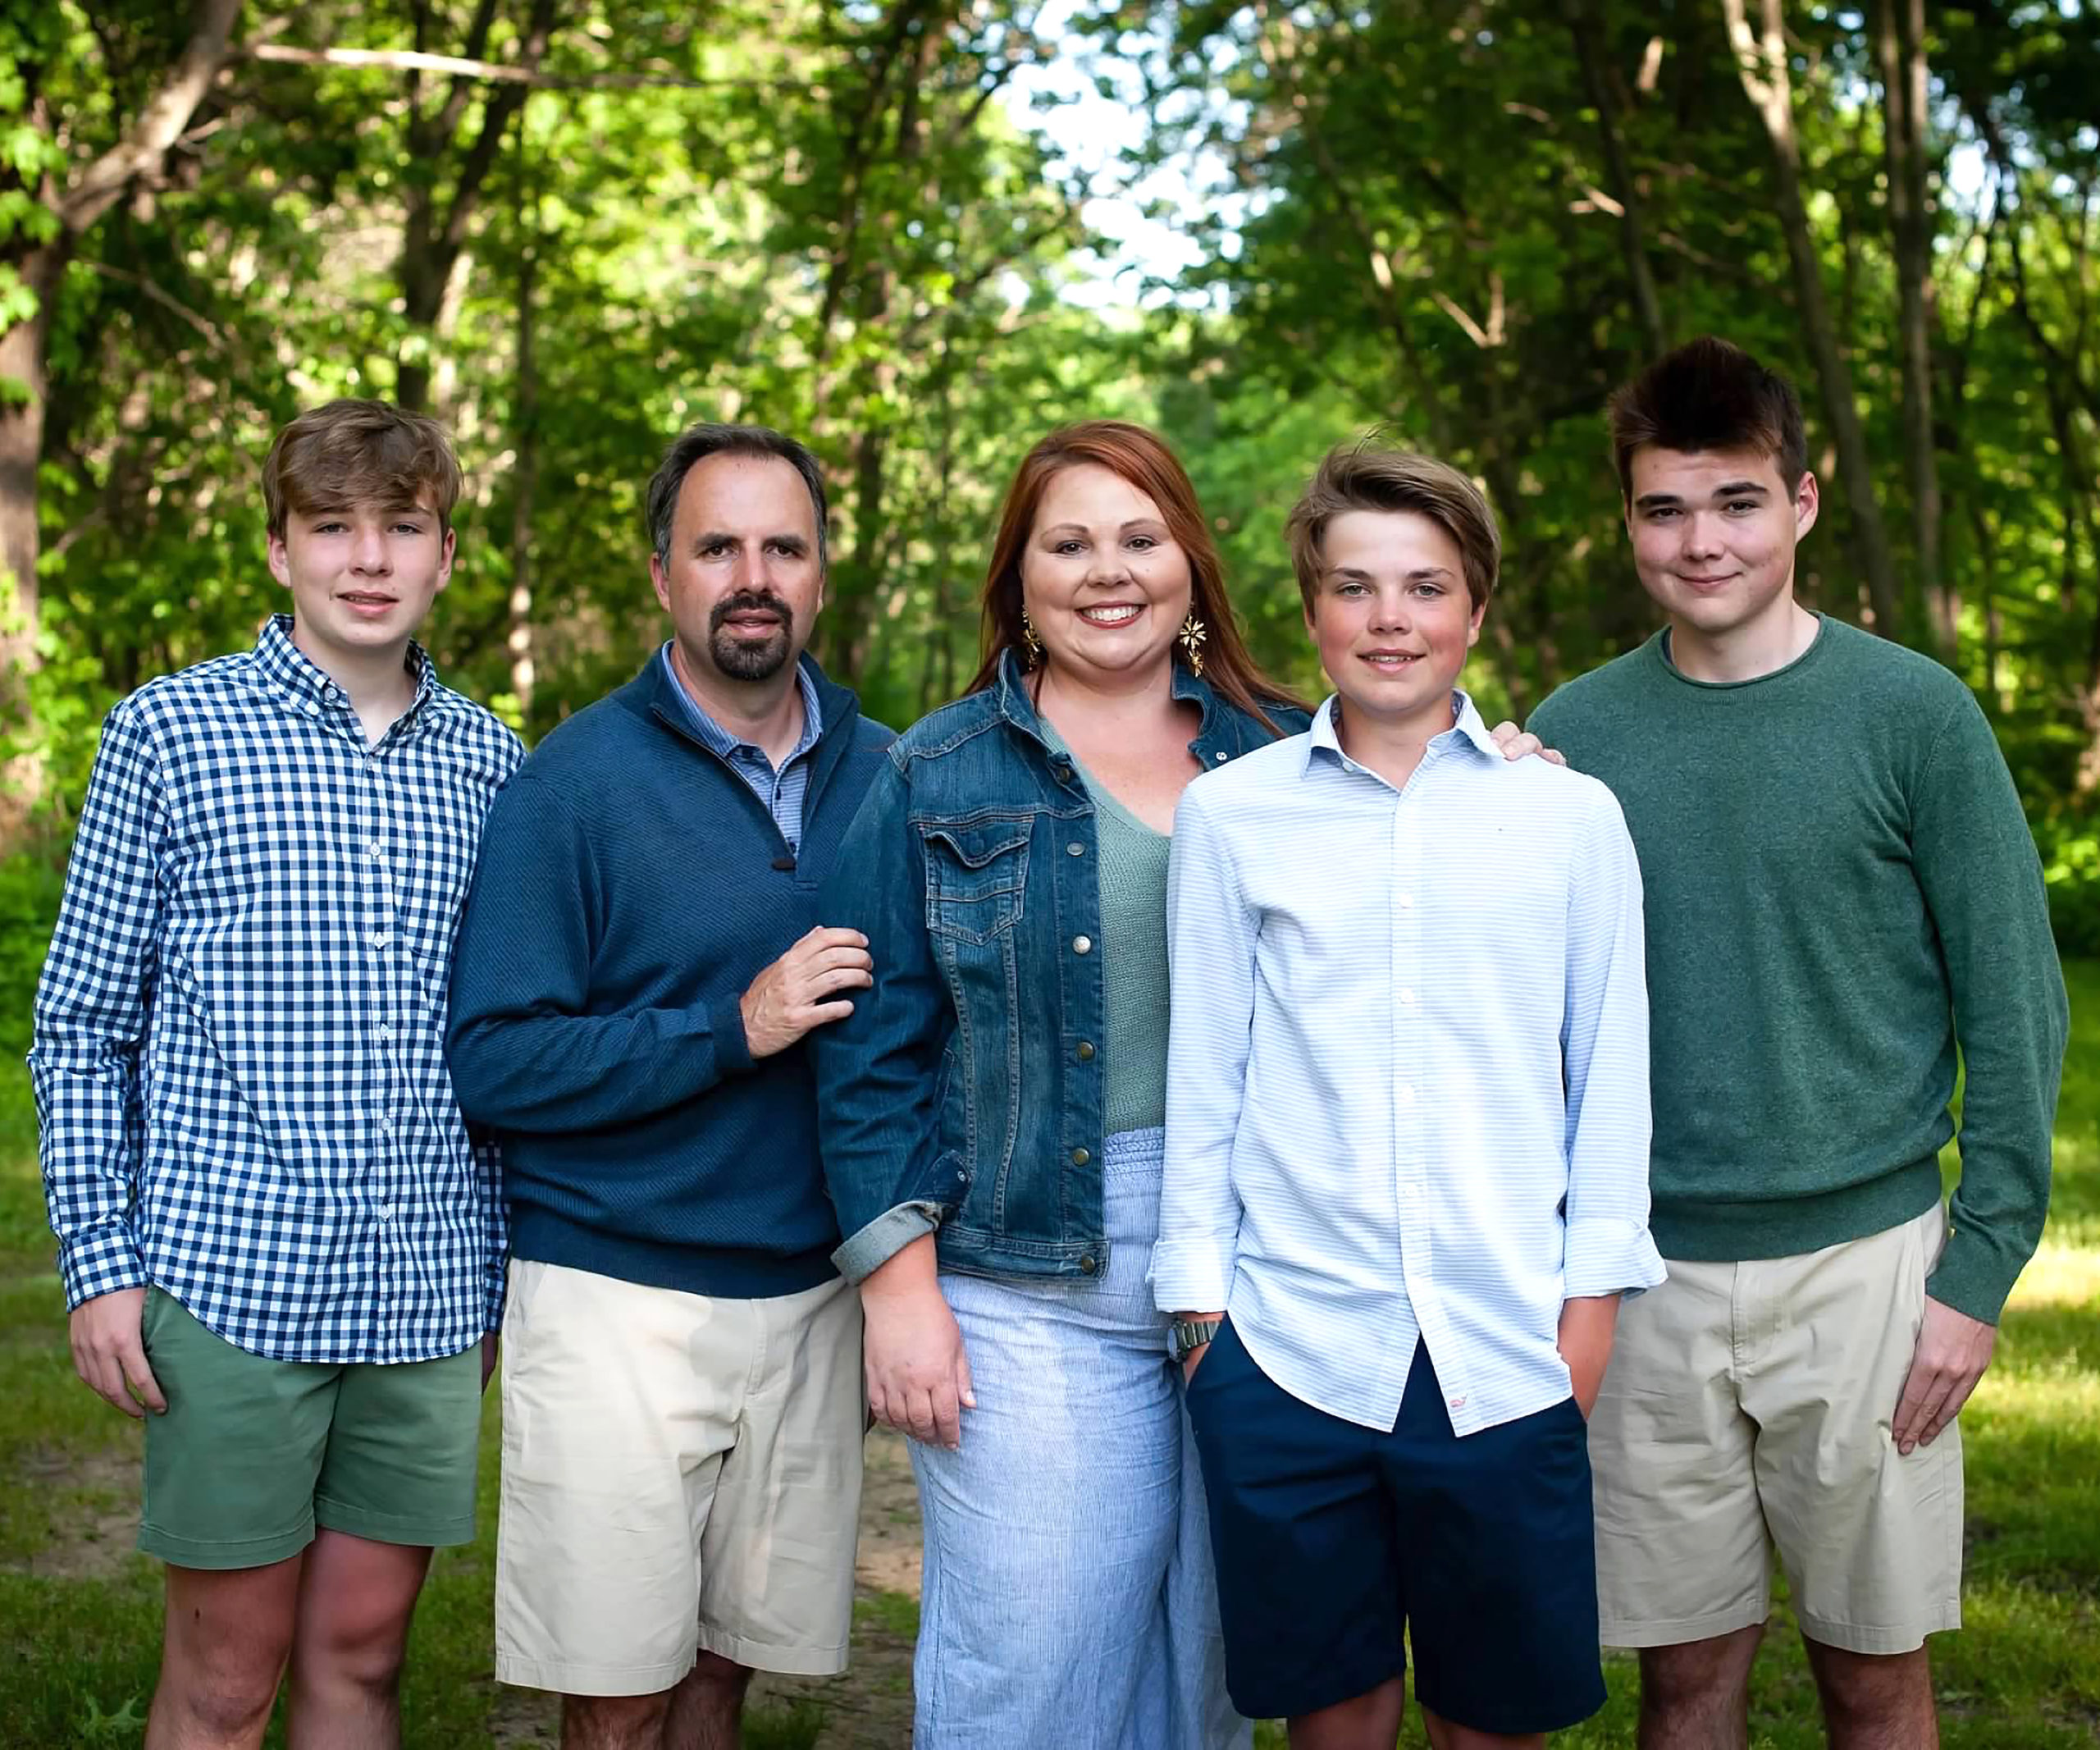 COES Dean Dr. Collin Wick with his wife and three sons